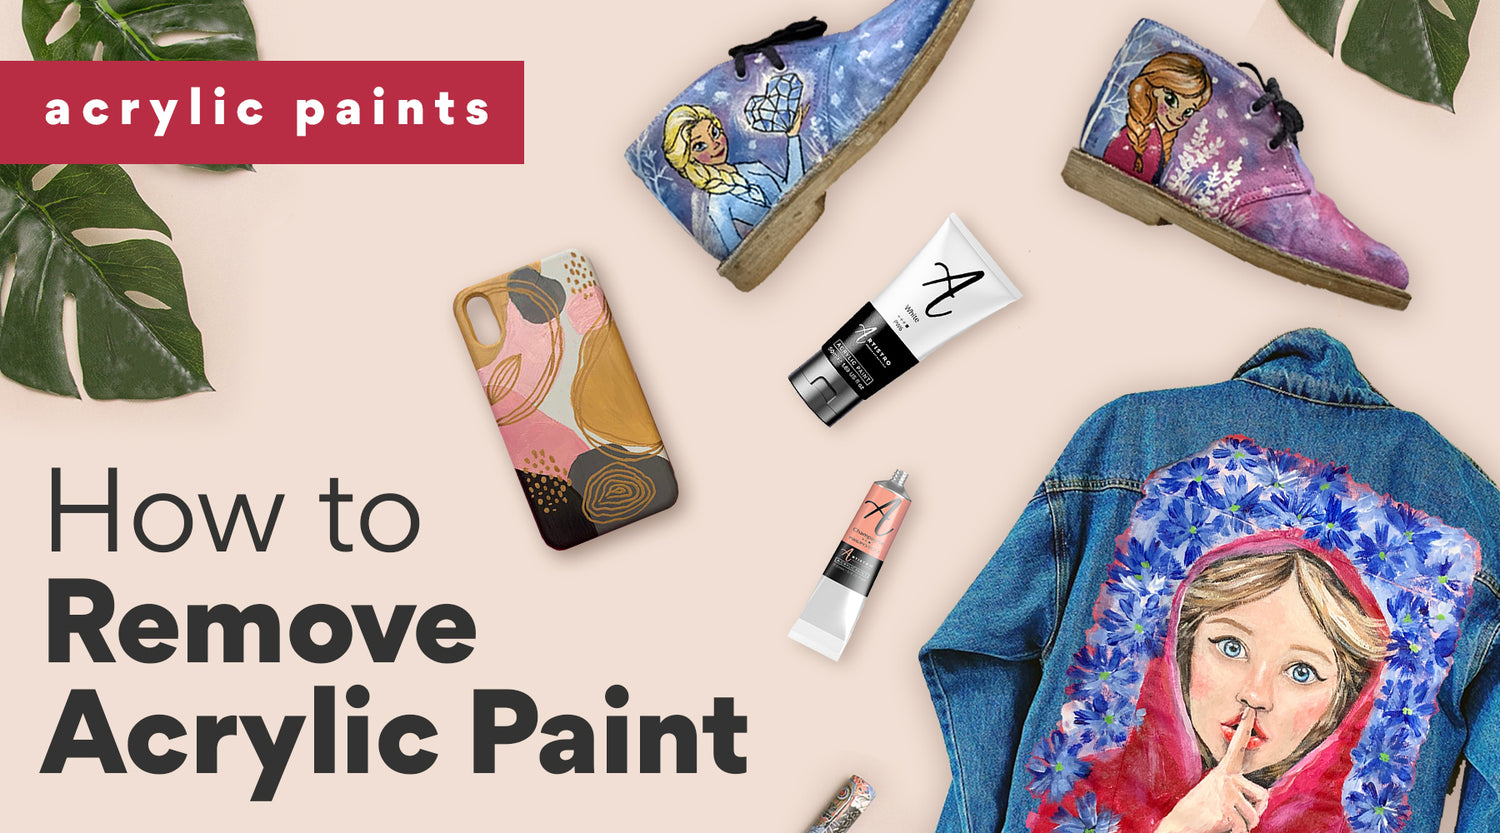 How to Remove Acrylic Paint from Various Surfaces Effectively